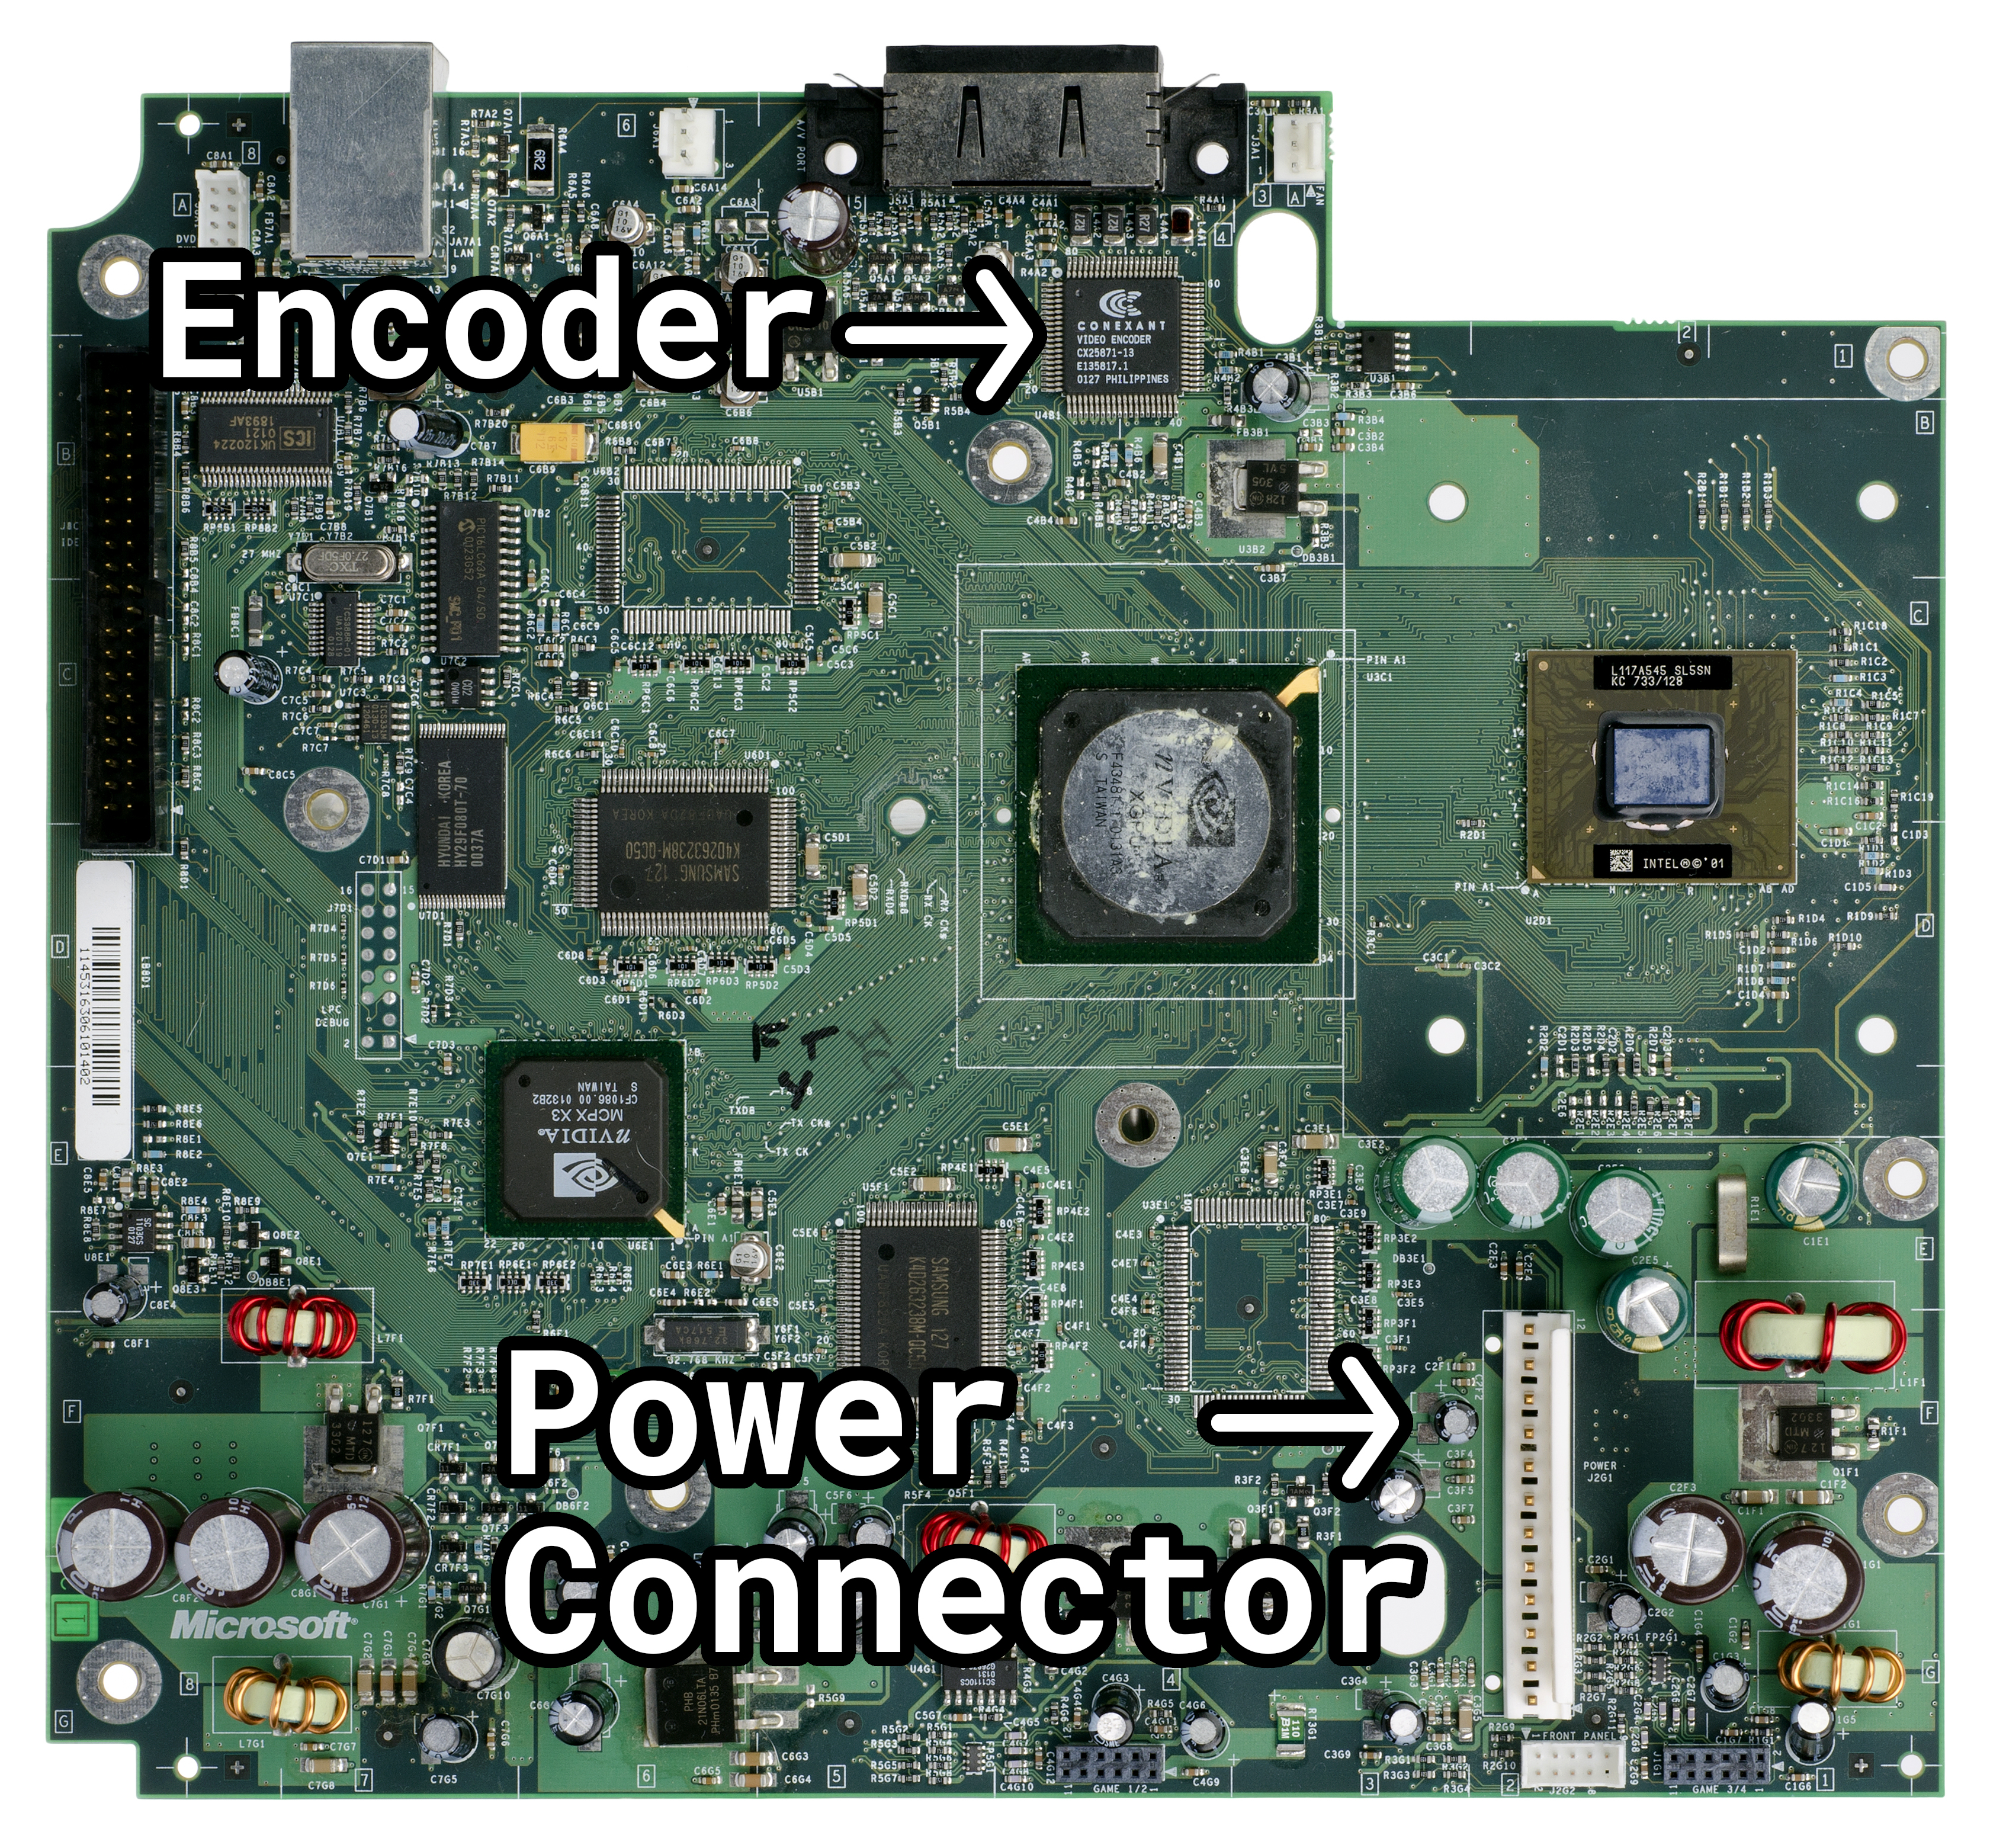 Image of Xbox motherboard